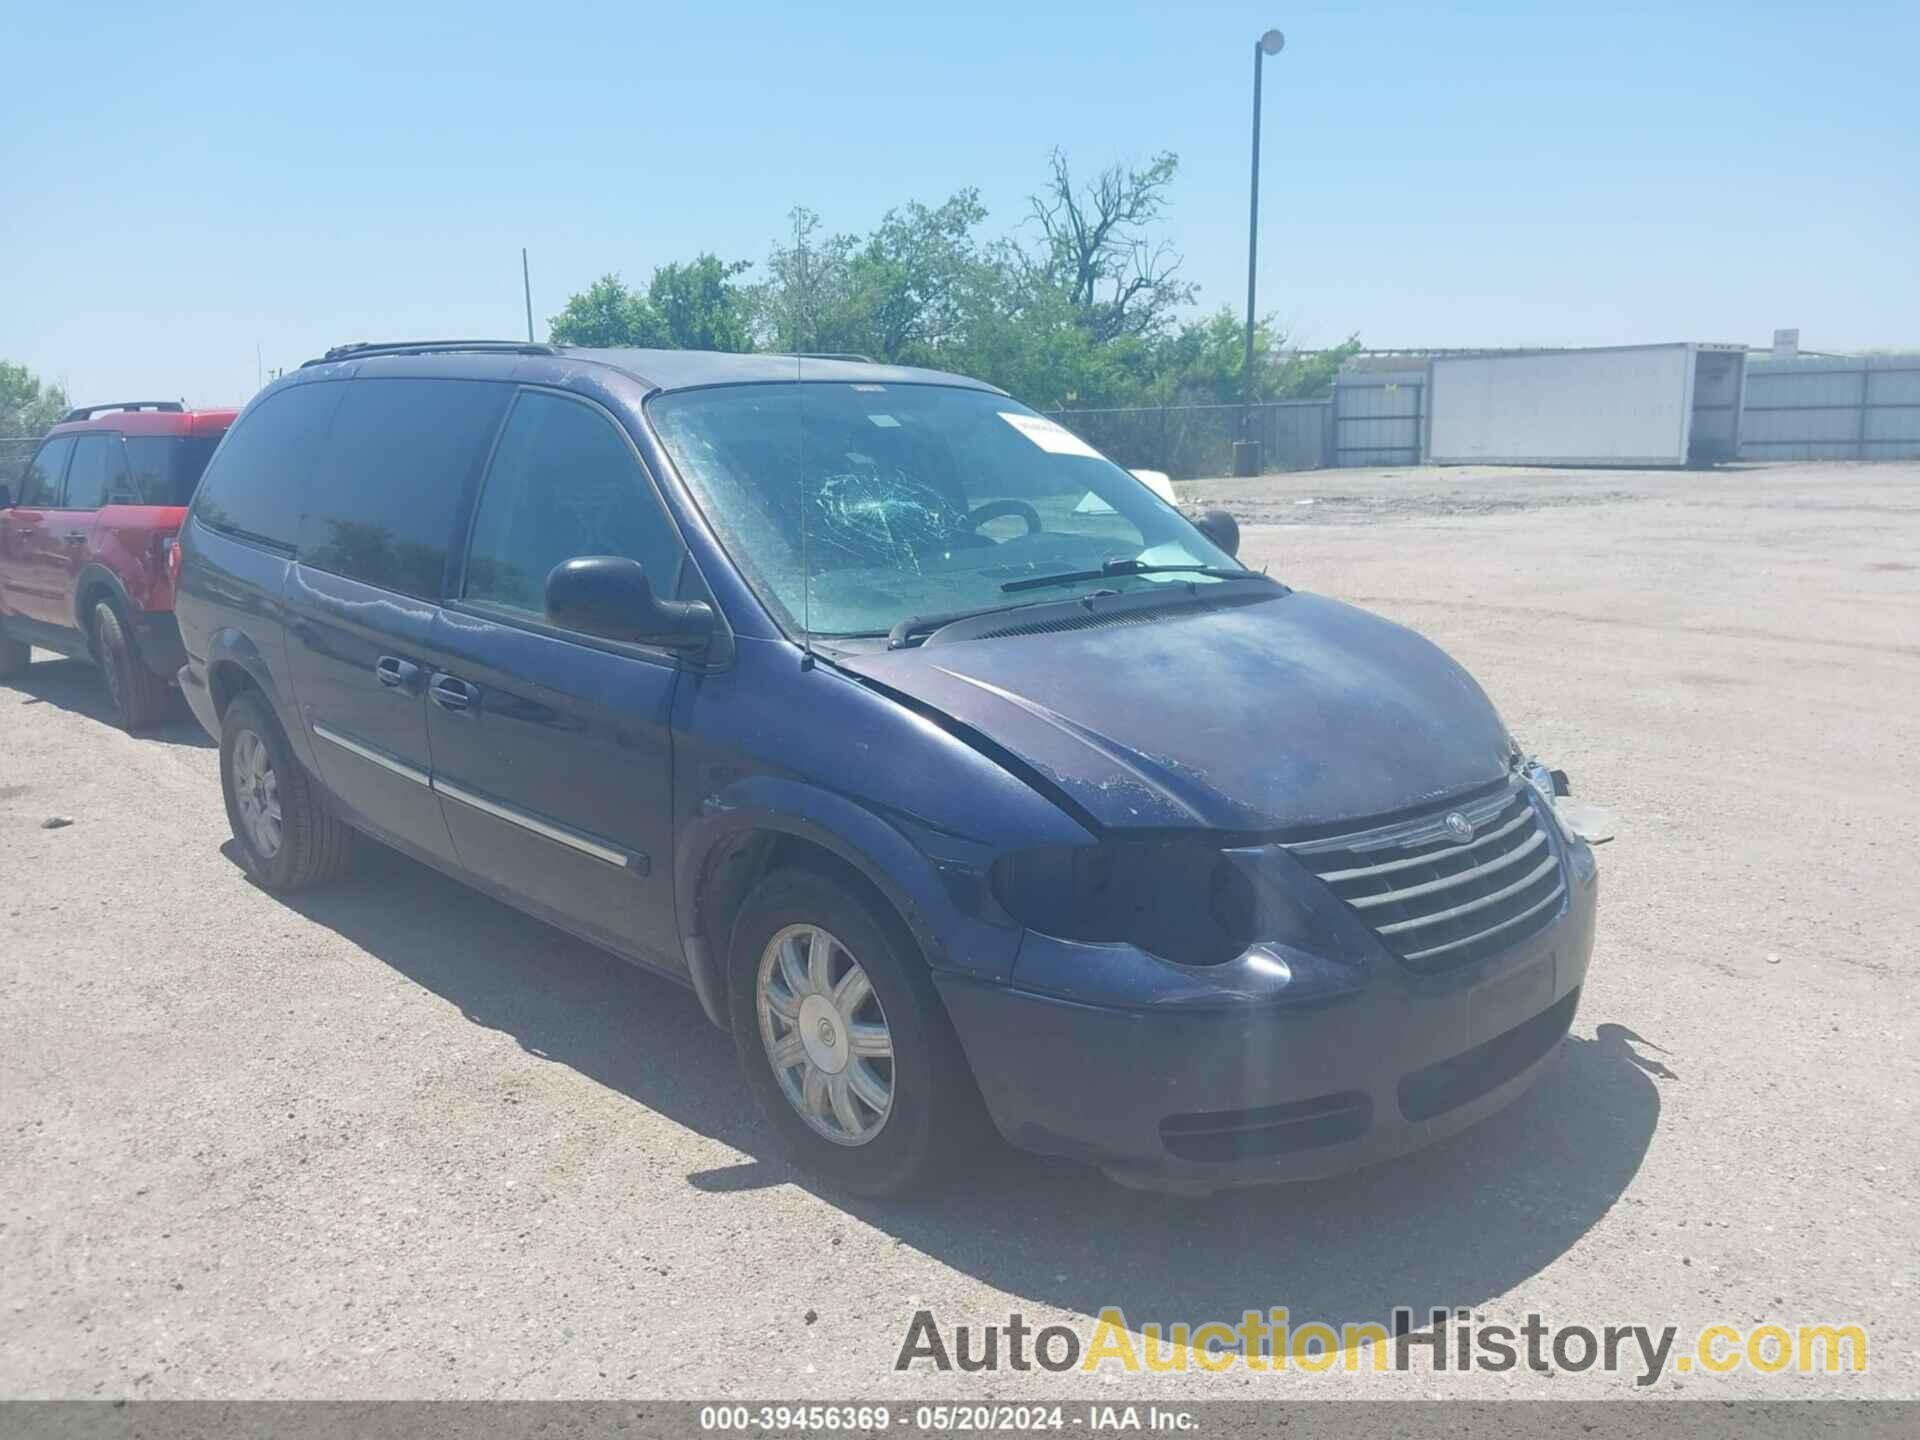 CHRYSLER TOWN & COUNTRY TOURING, 2A4GP54L86R798994